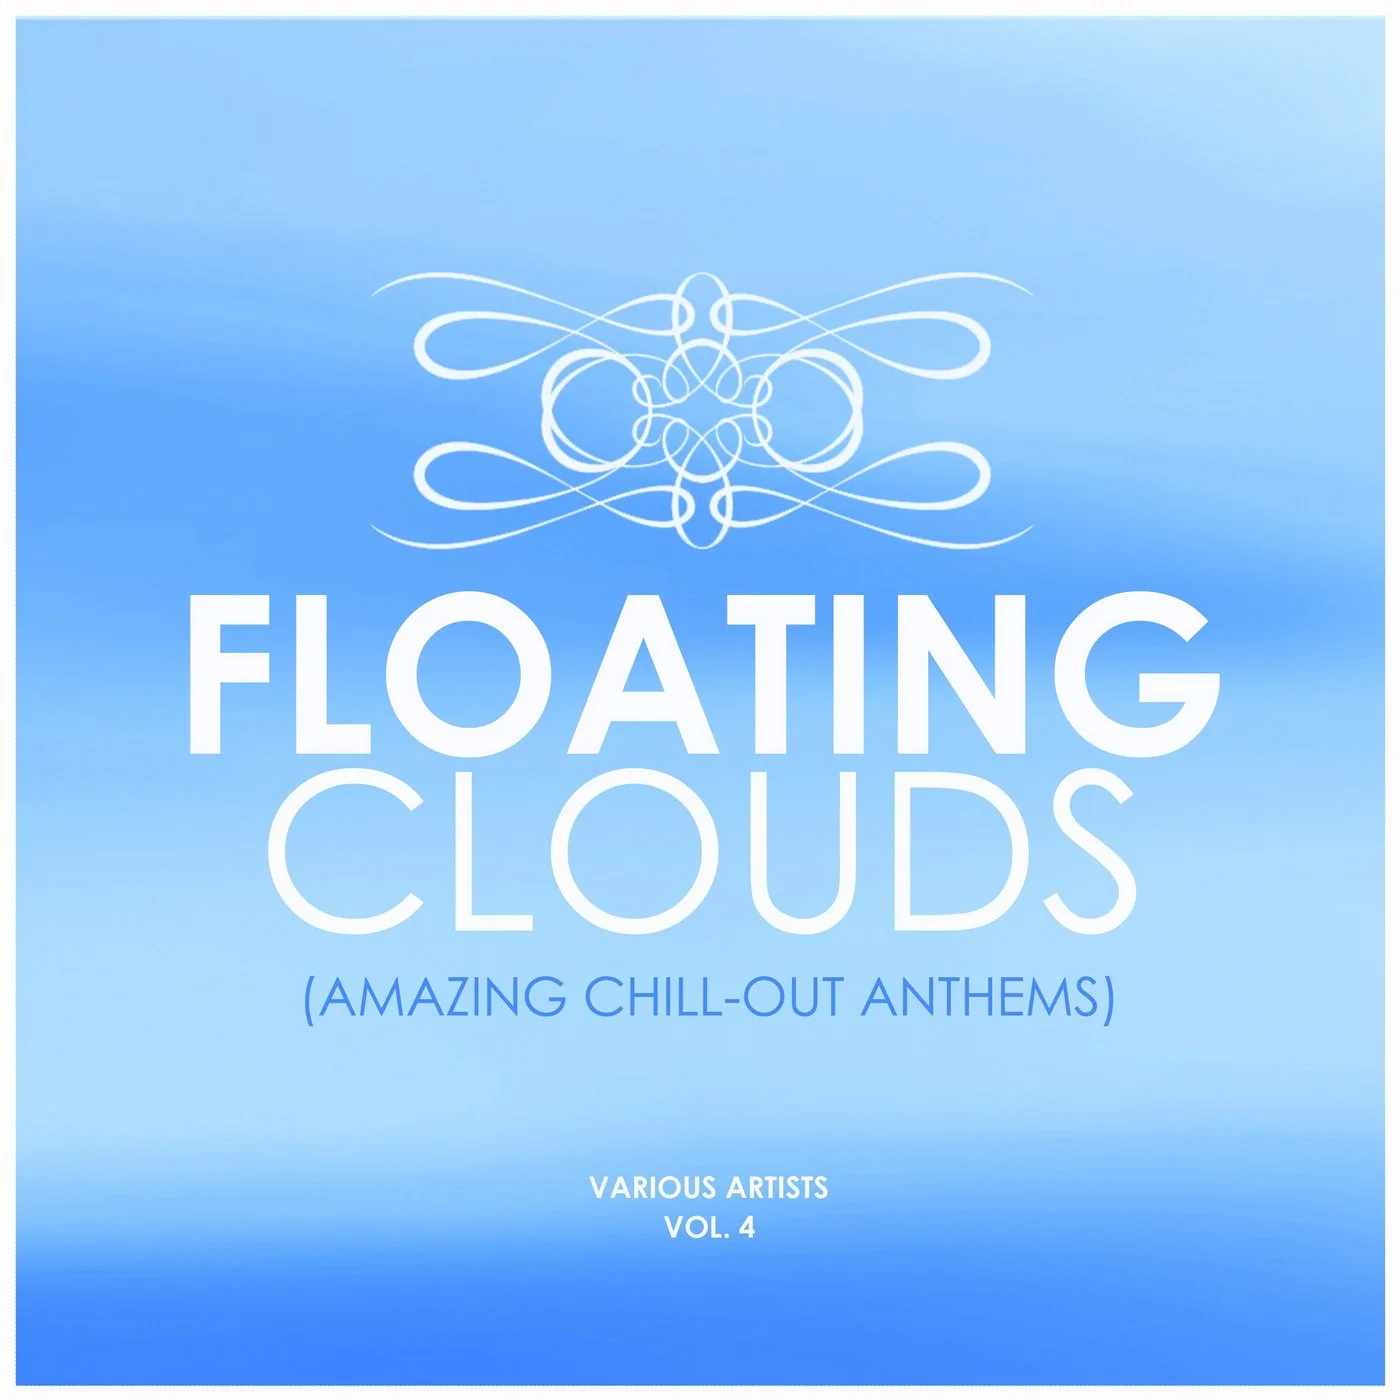 Cover von Compilation "Floating Clouds (Amazing Chill out Anthems), Vol. 4"